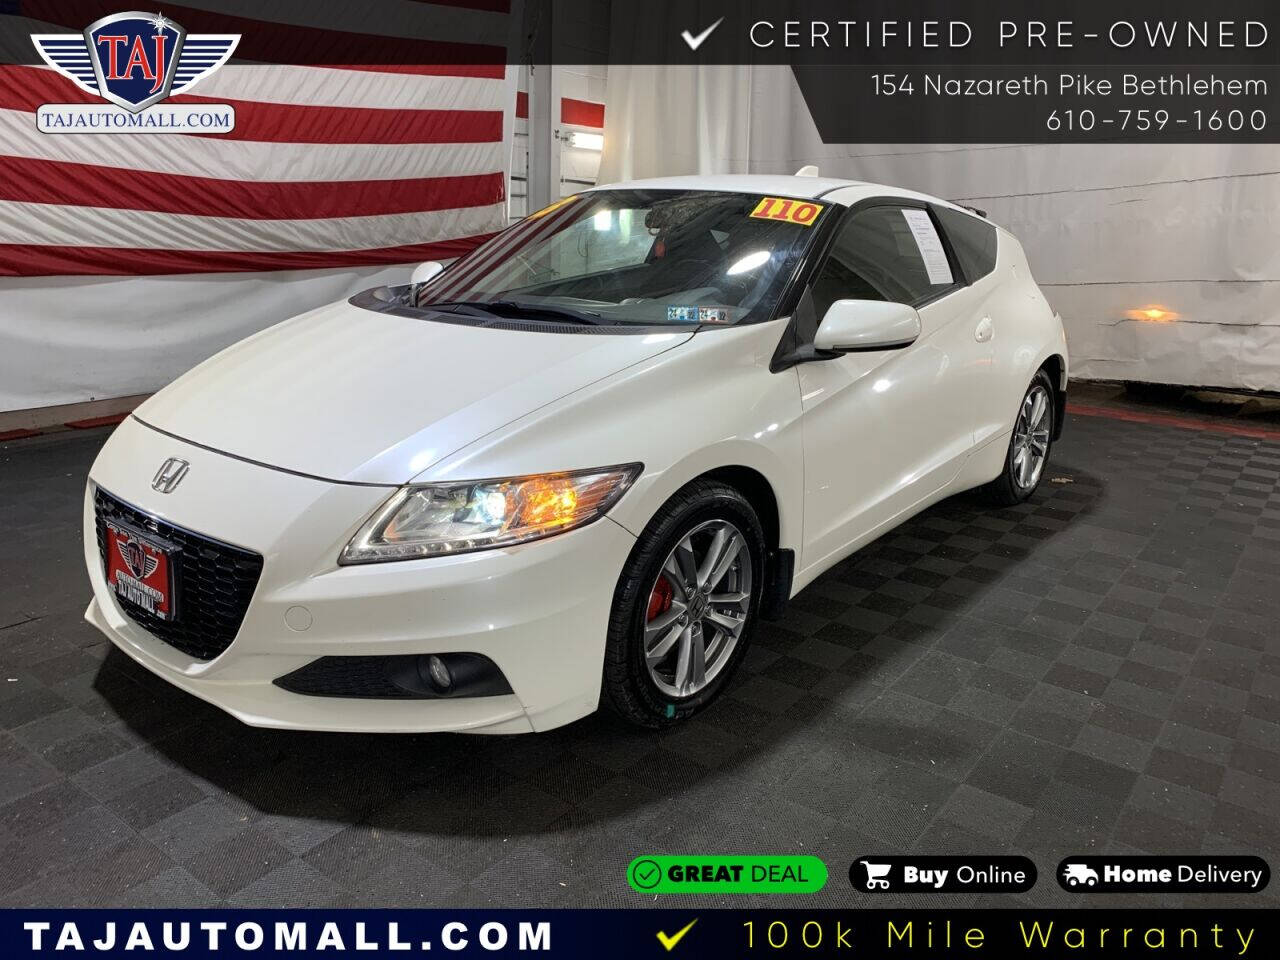 Possibly the best crz out there!